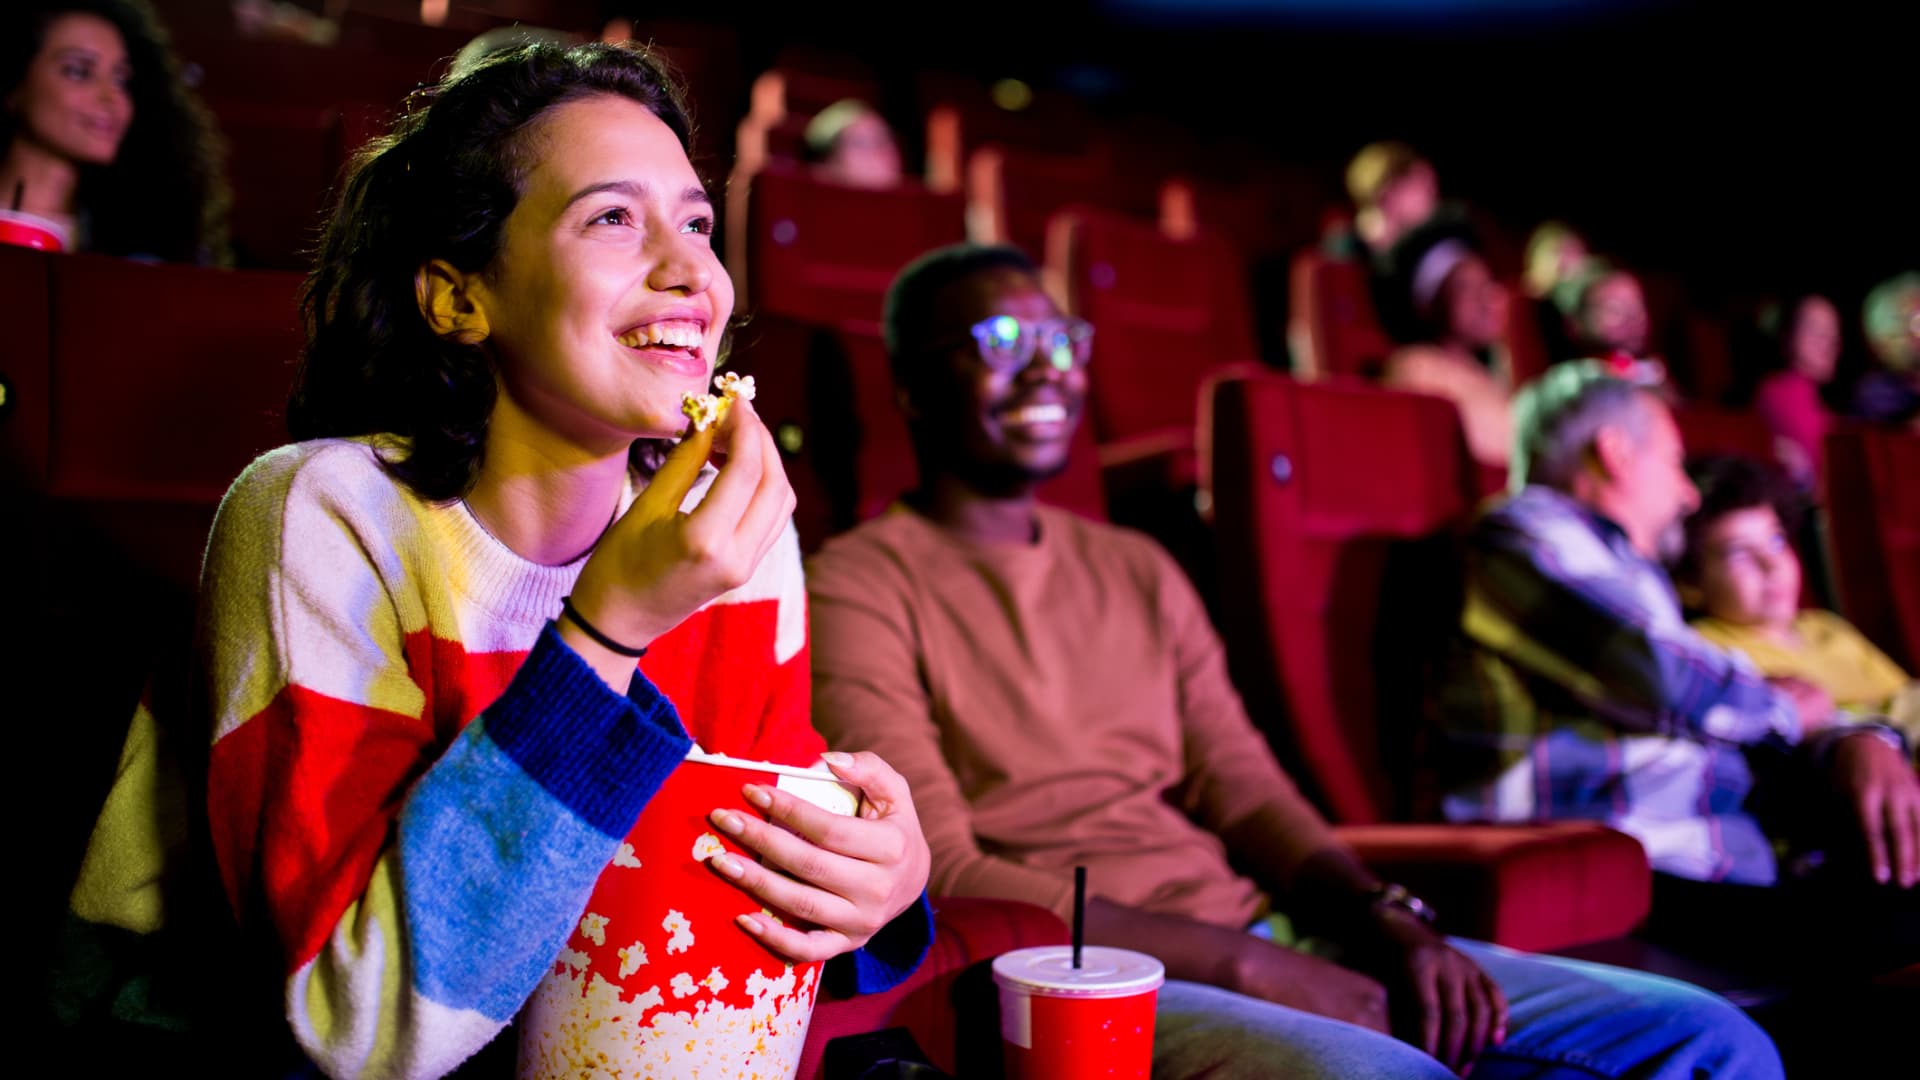 Movie theaters are evolving, not dying